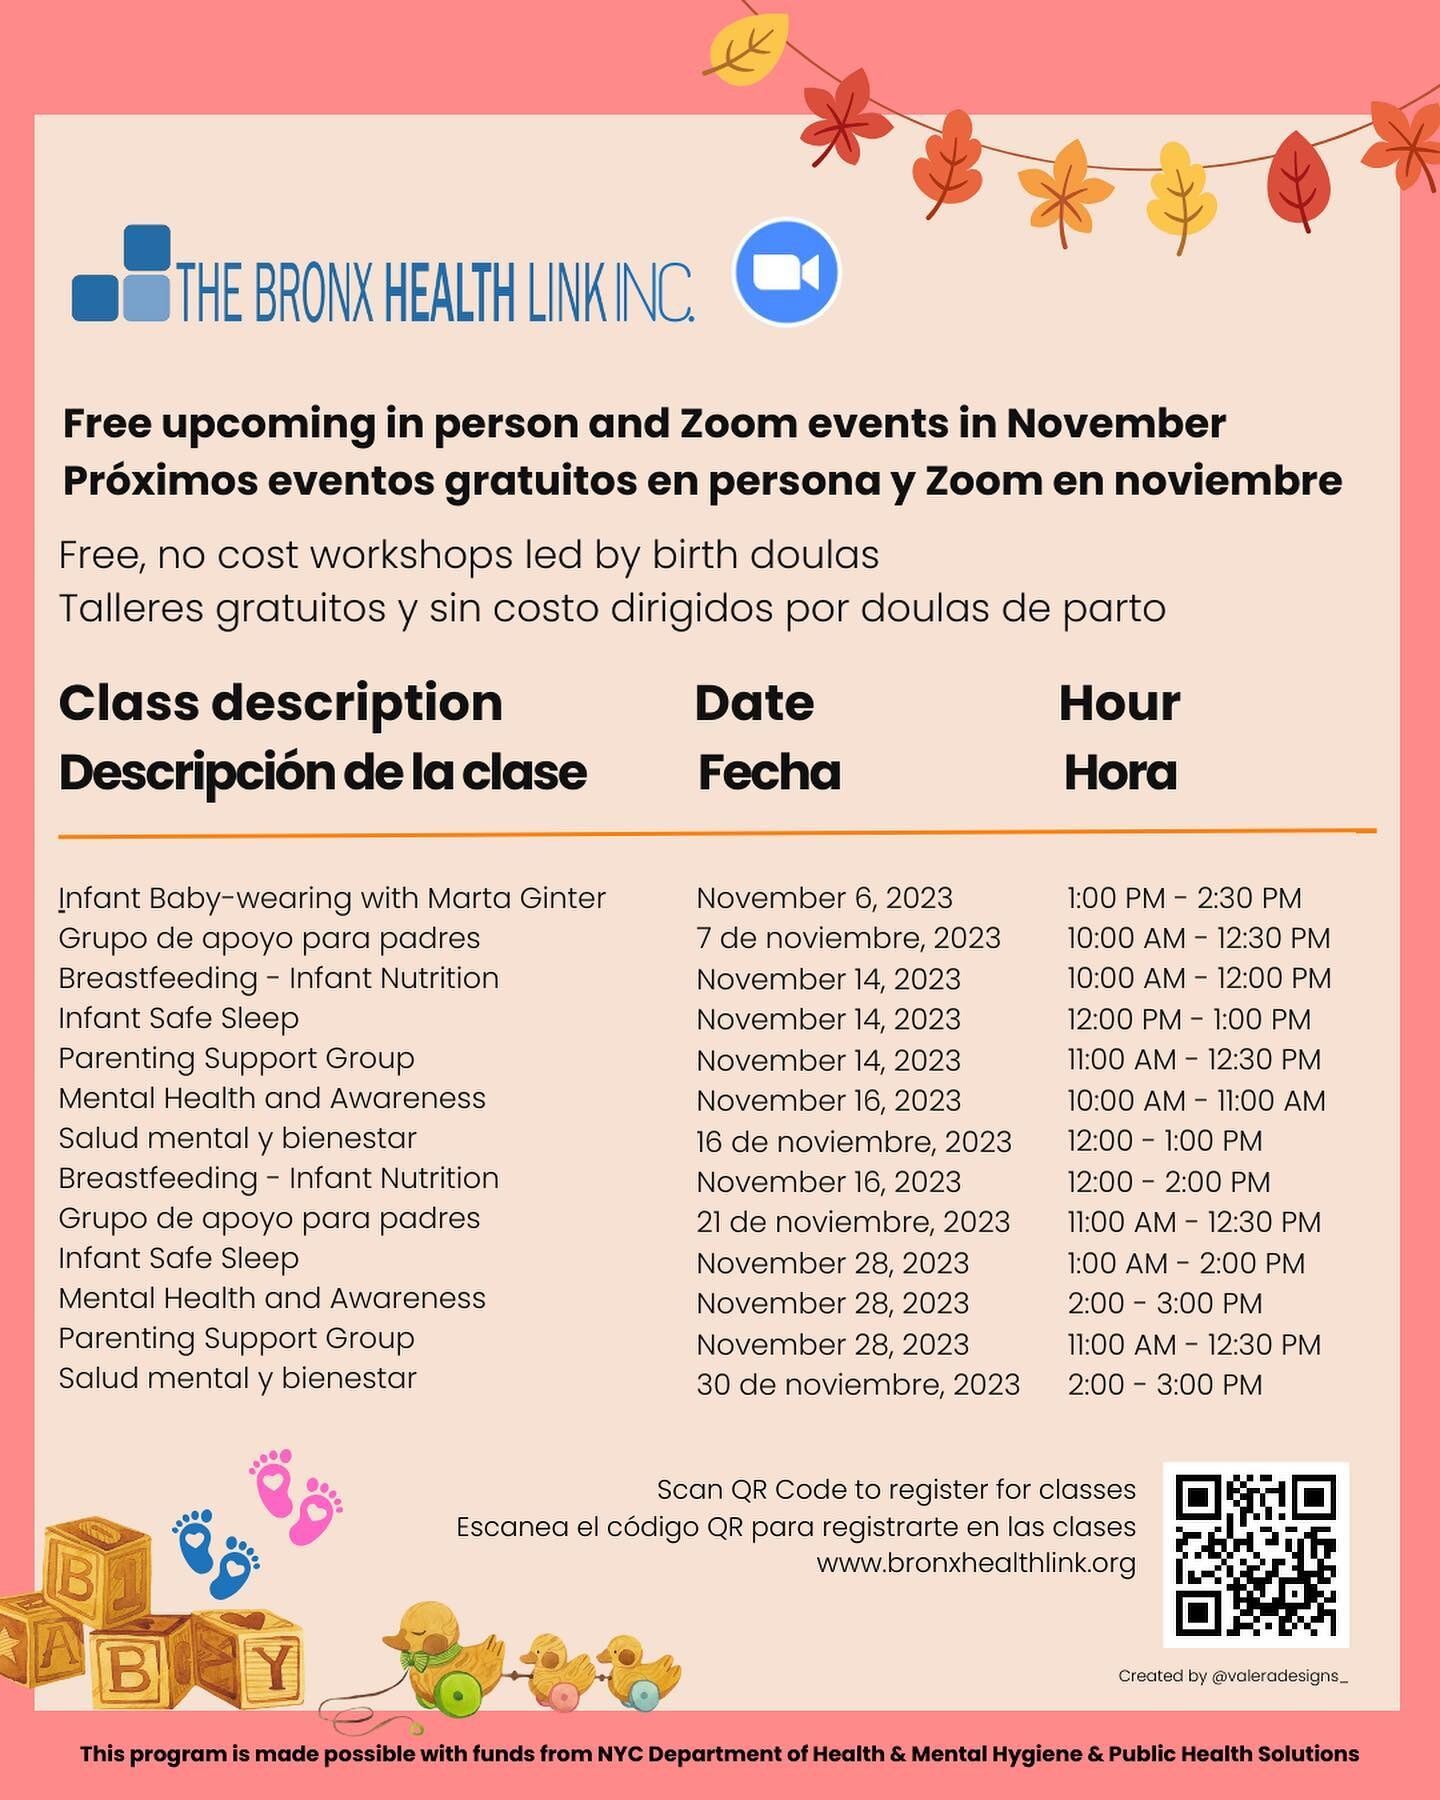 TBHL is excited to bring you a diverse range of events from in-person gatherings to free Zoom webinars, and is committed to advancing the cause of maternal and infant health. Be sure to mark your calendars for these November events as we work togethe